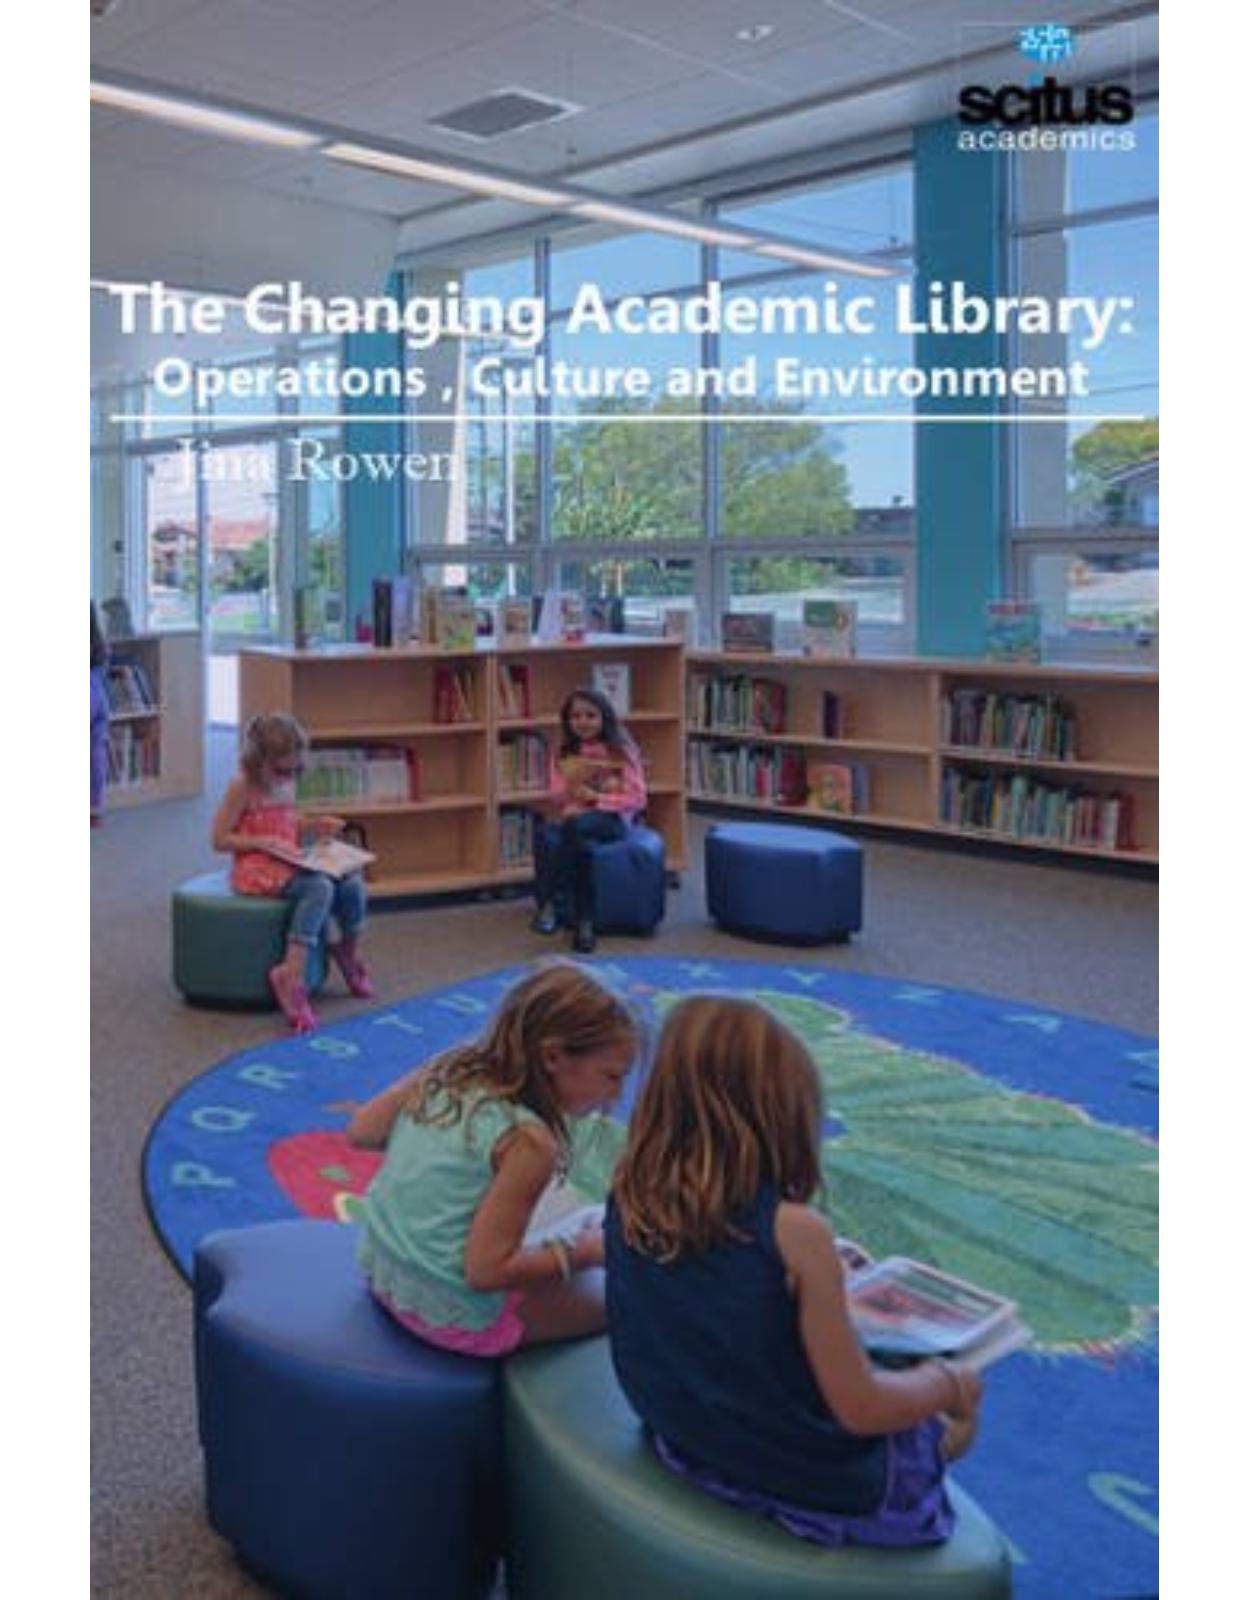 The Changing Academic Library: Operations, Culture and Environment